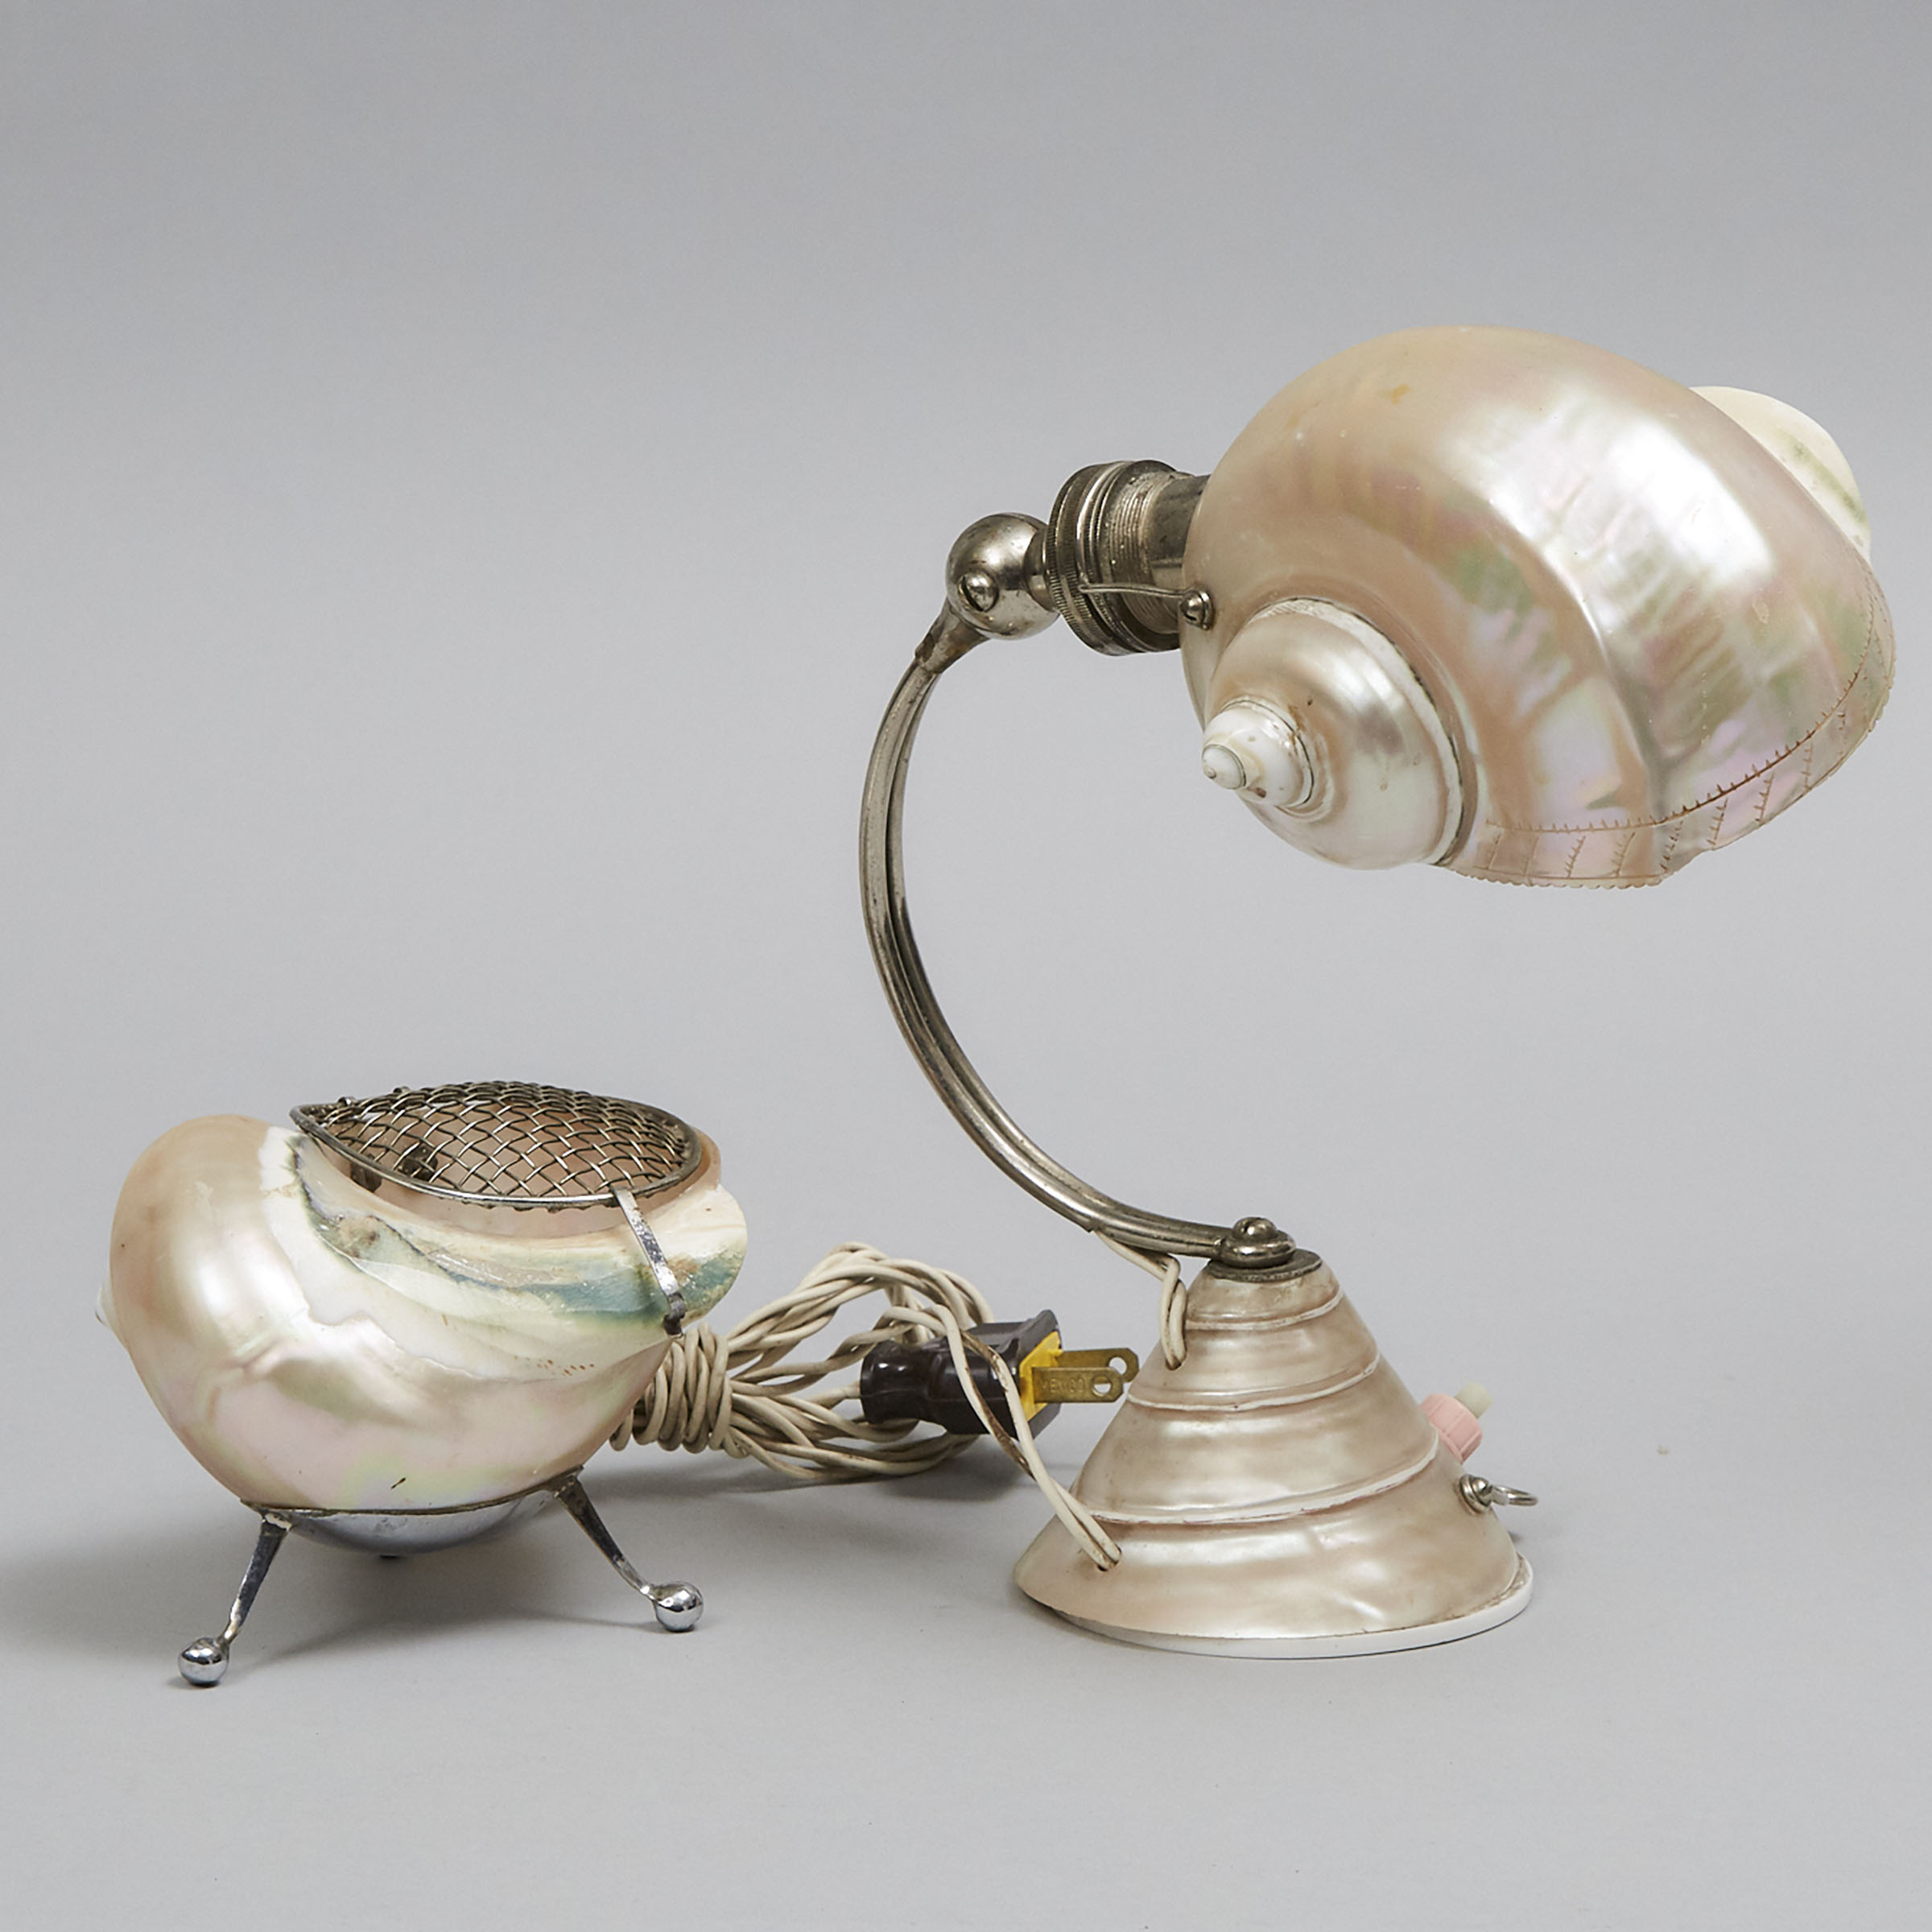 A French Nacre (Sea Shell) Vanity Lamp and a Pot Pourri, mid 20th century